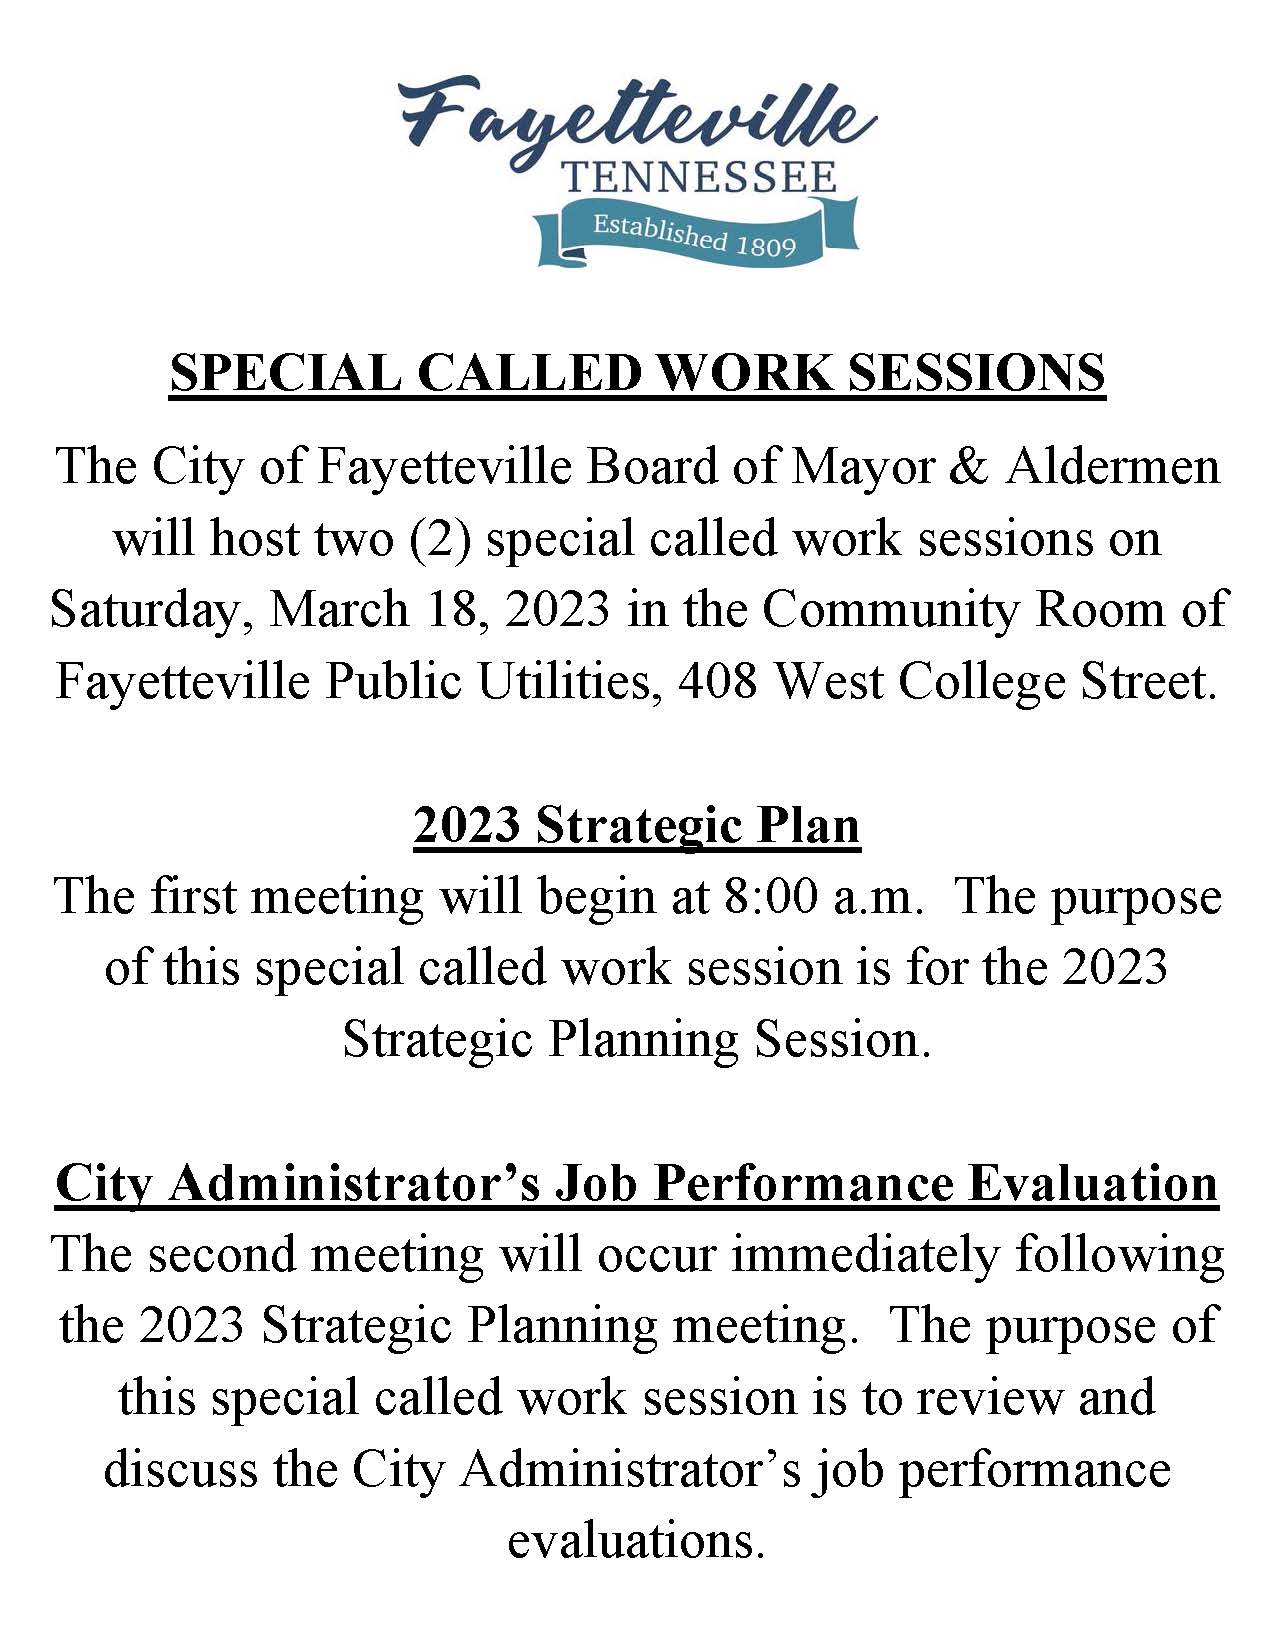 2023-03-18 Special Called Work Session-2023 Strategic Planning Session